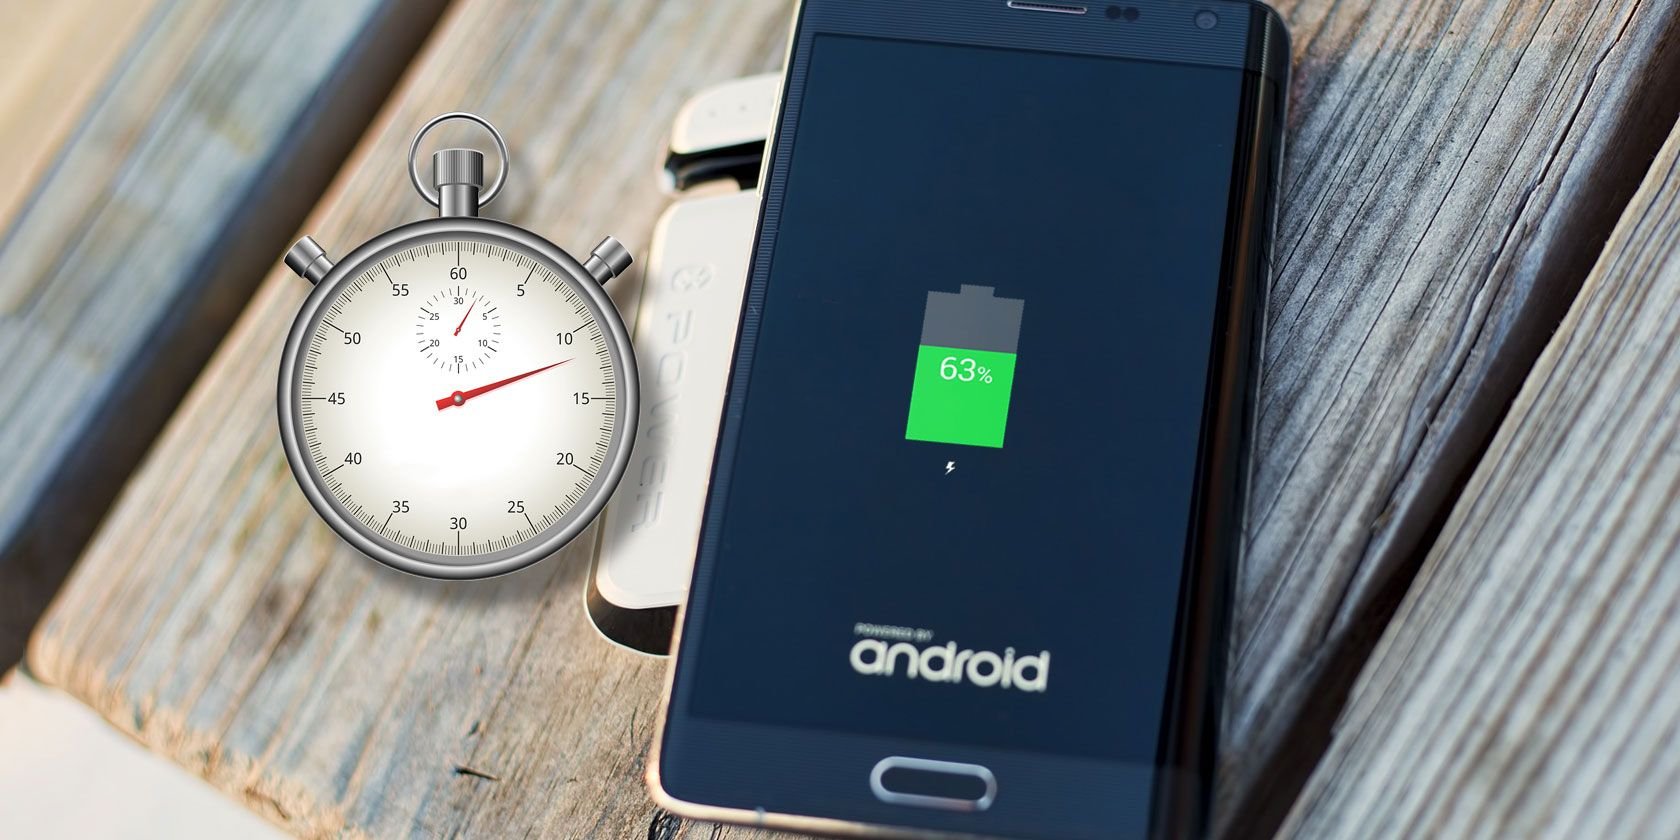 How to Charge Your Android Phone Faster: 10 Tips and Tricks